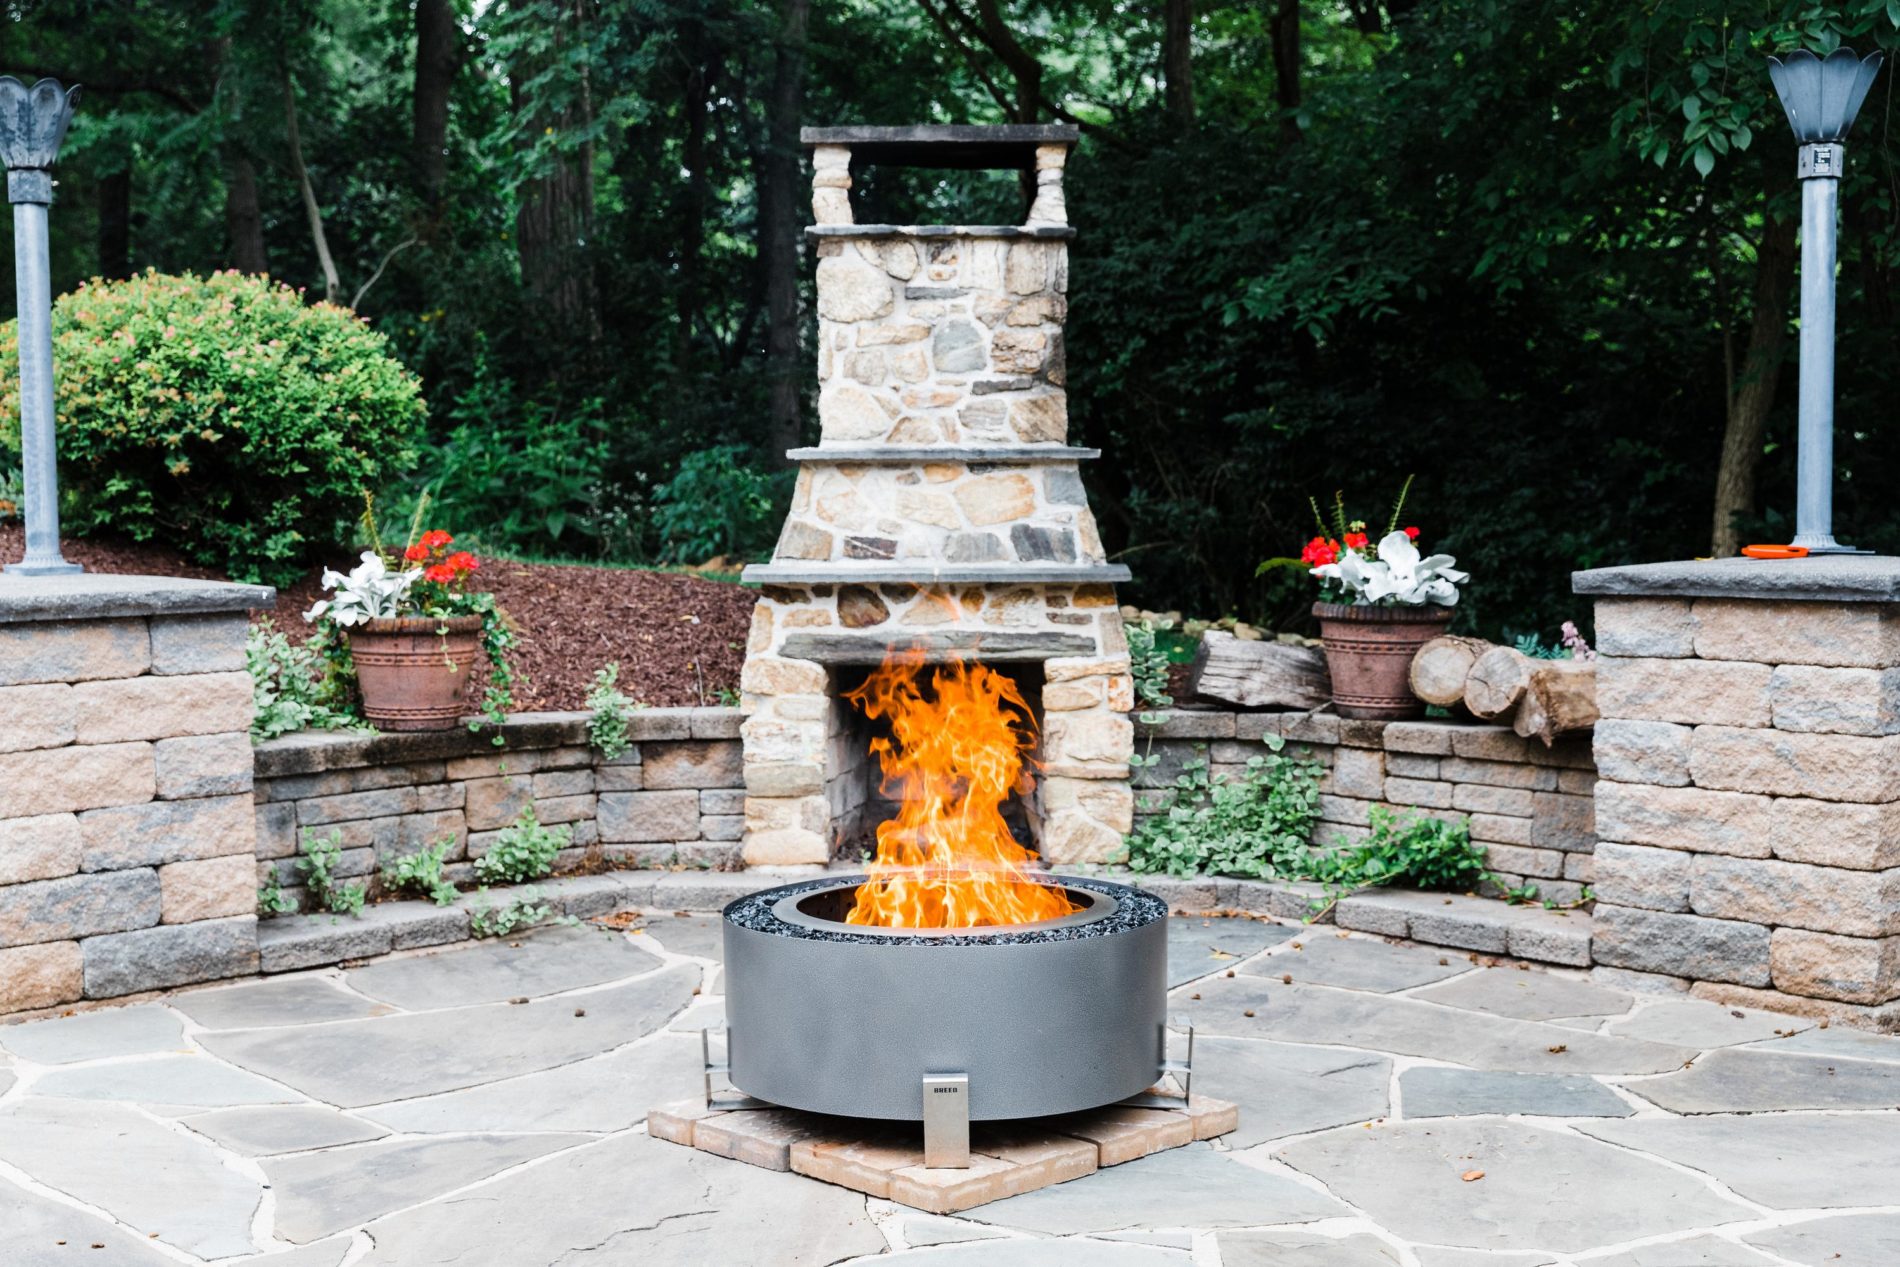 Should I get a fire pit or an outdoor fireplace? Read on to learn more about the best options for your outdoor living space?